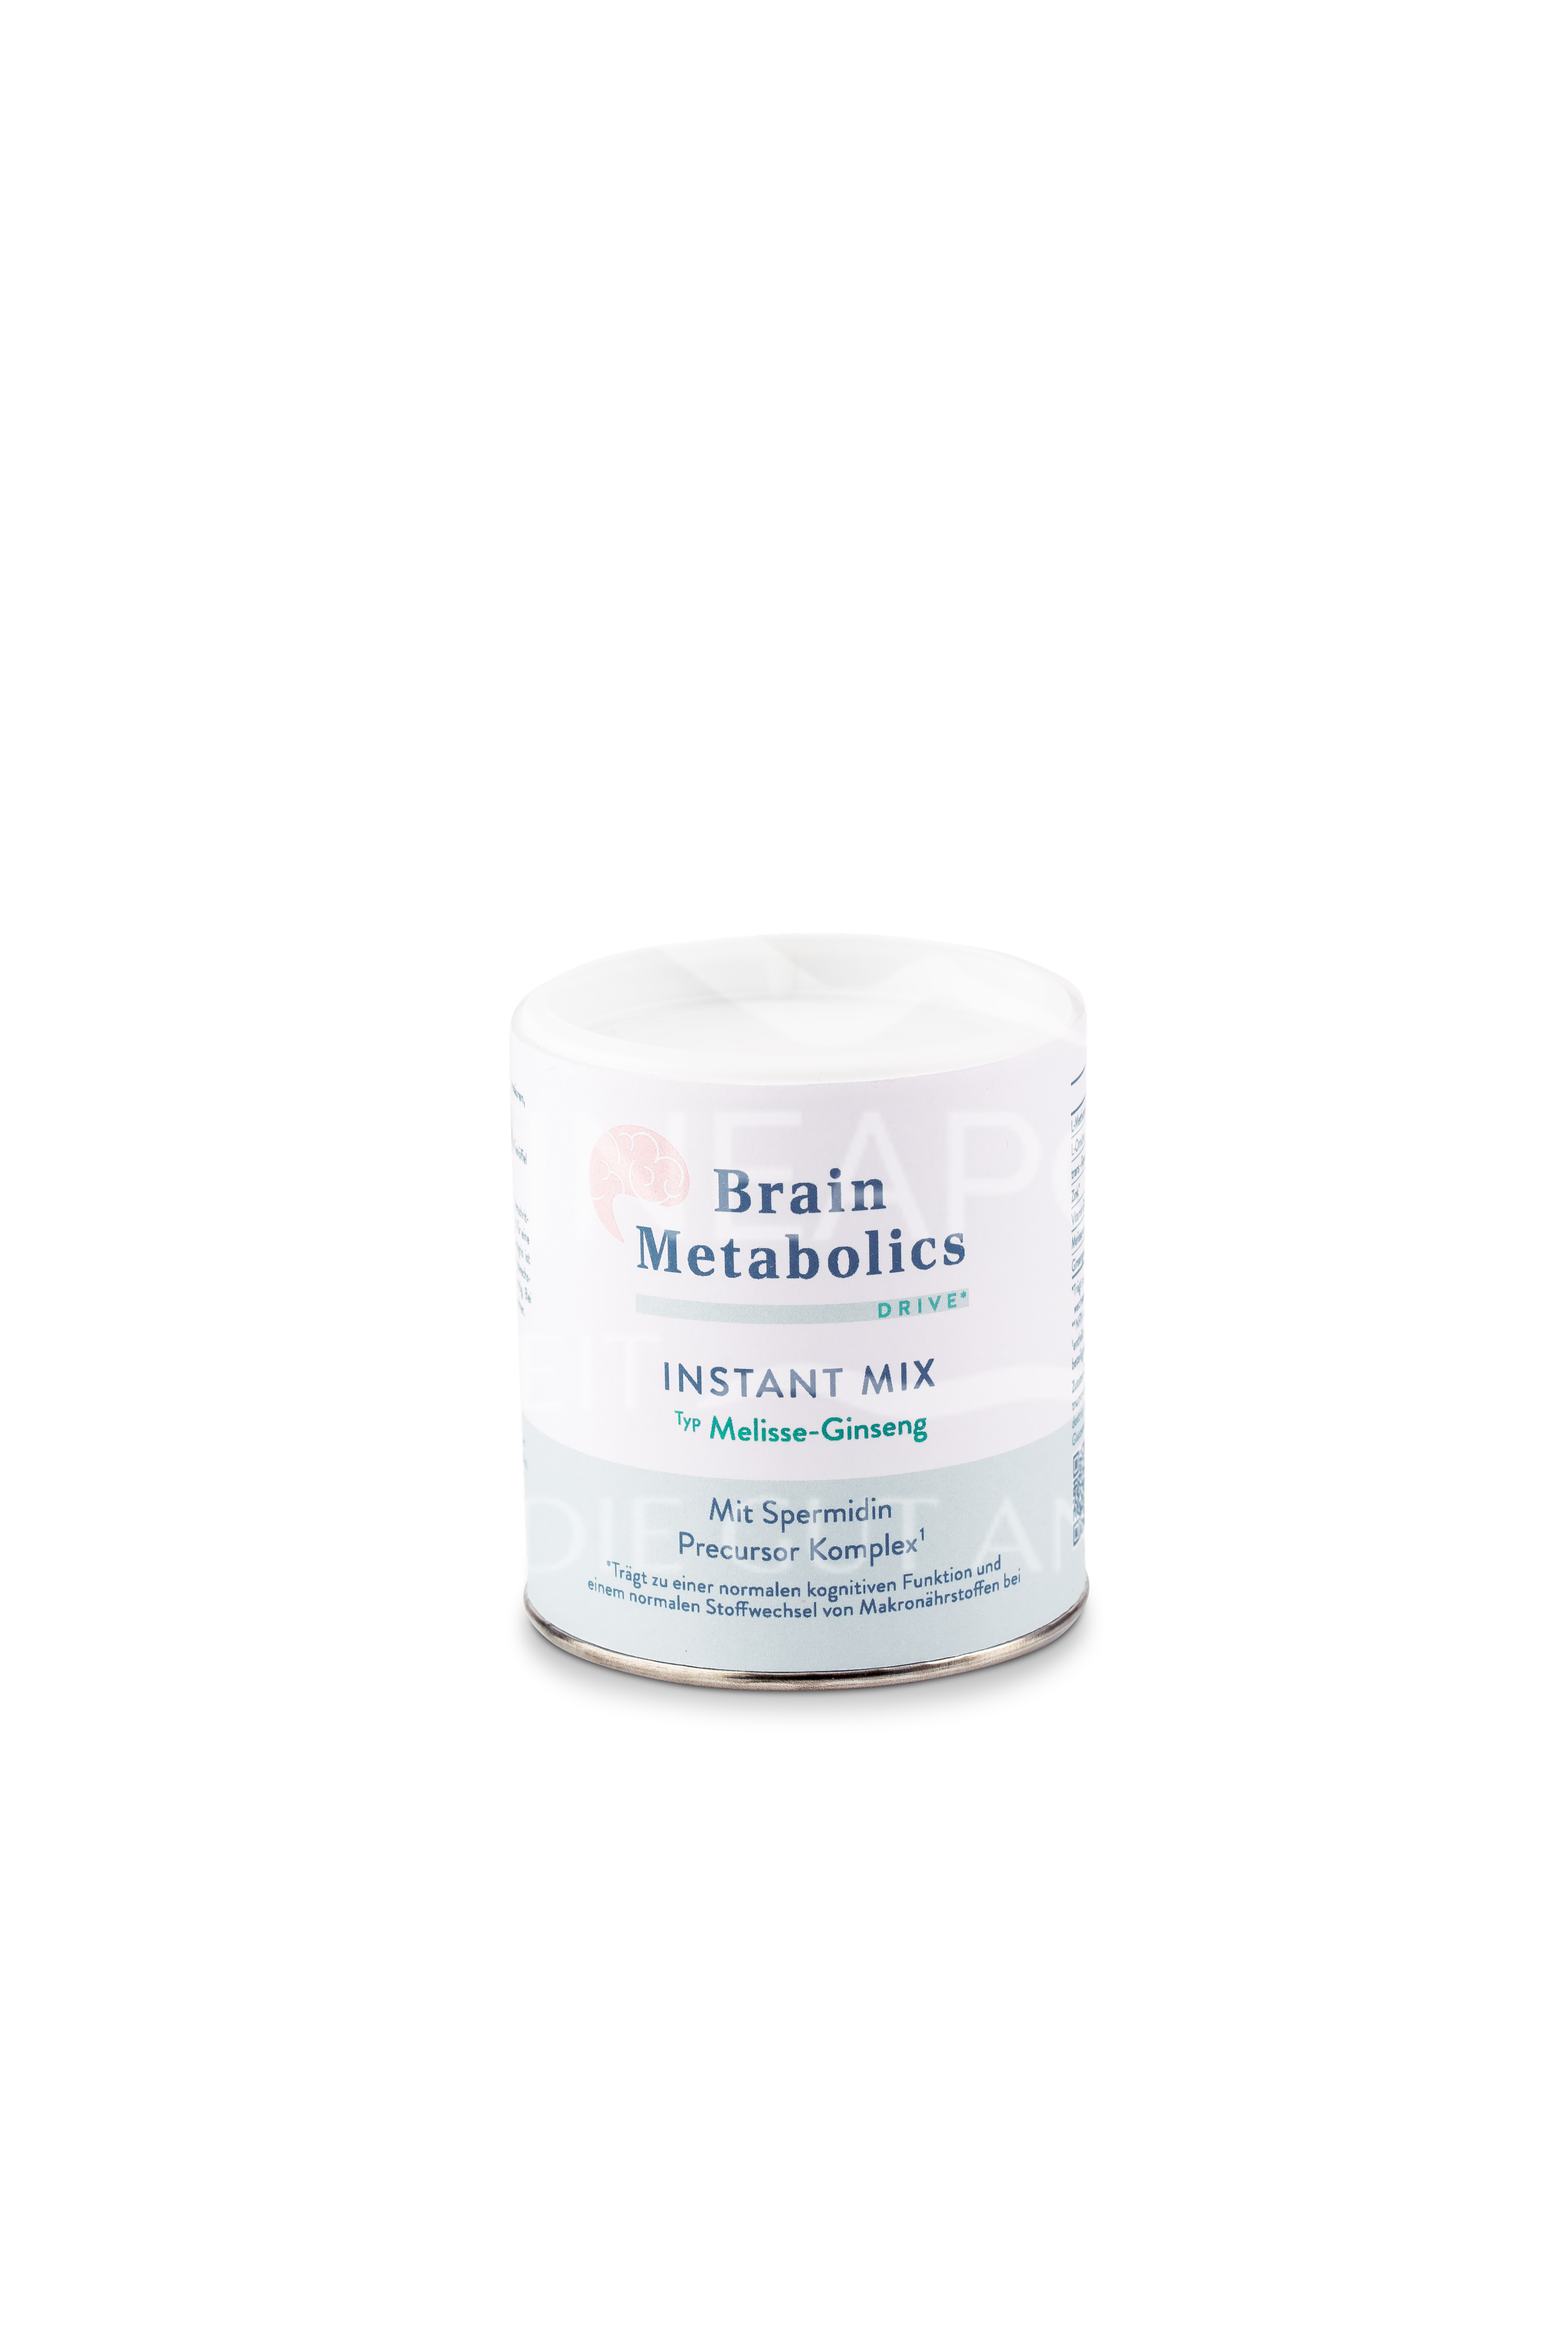 Brain Metabolics Drive Instant Mix Typ Melisse-Ginseng